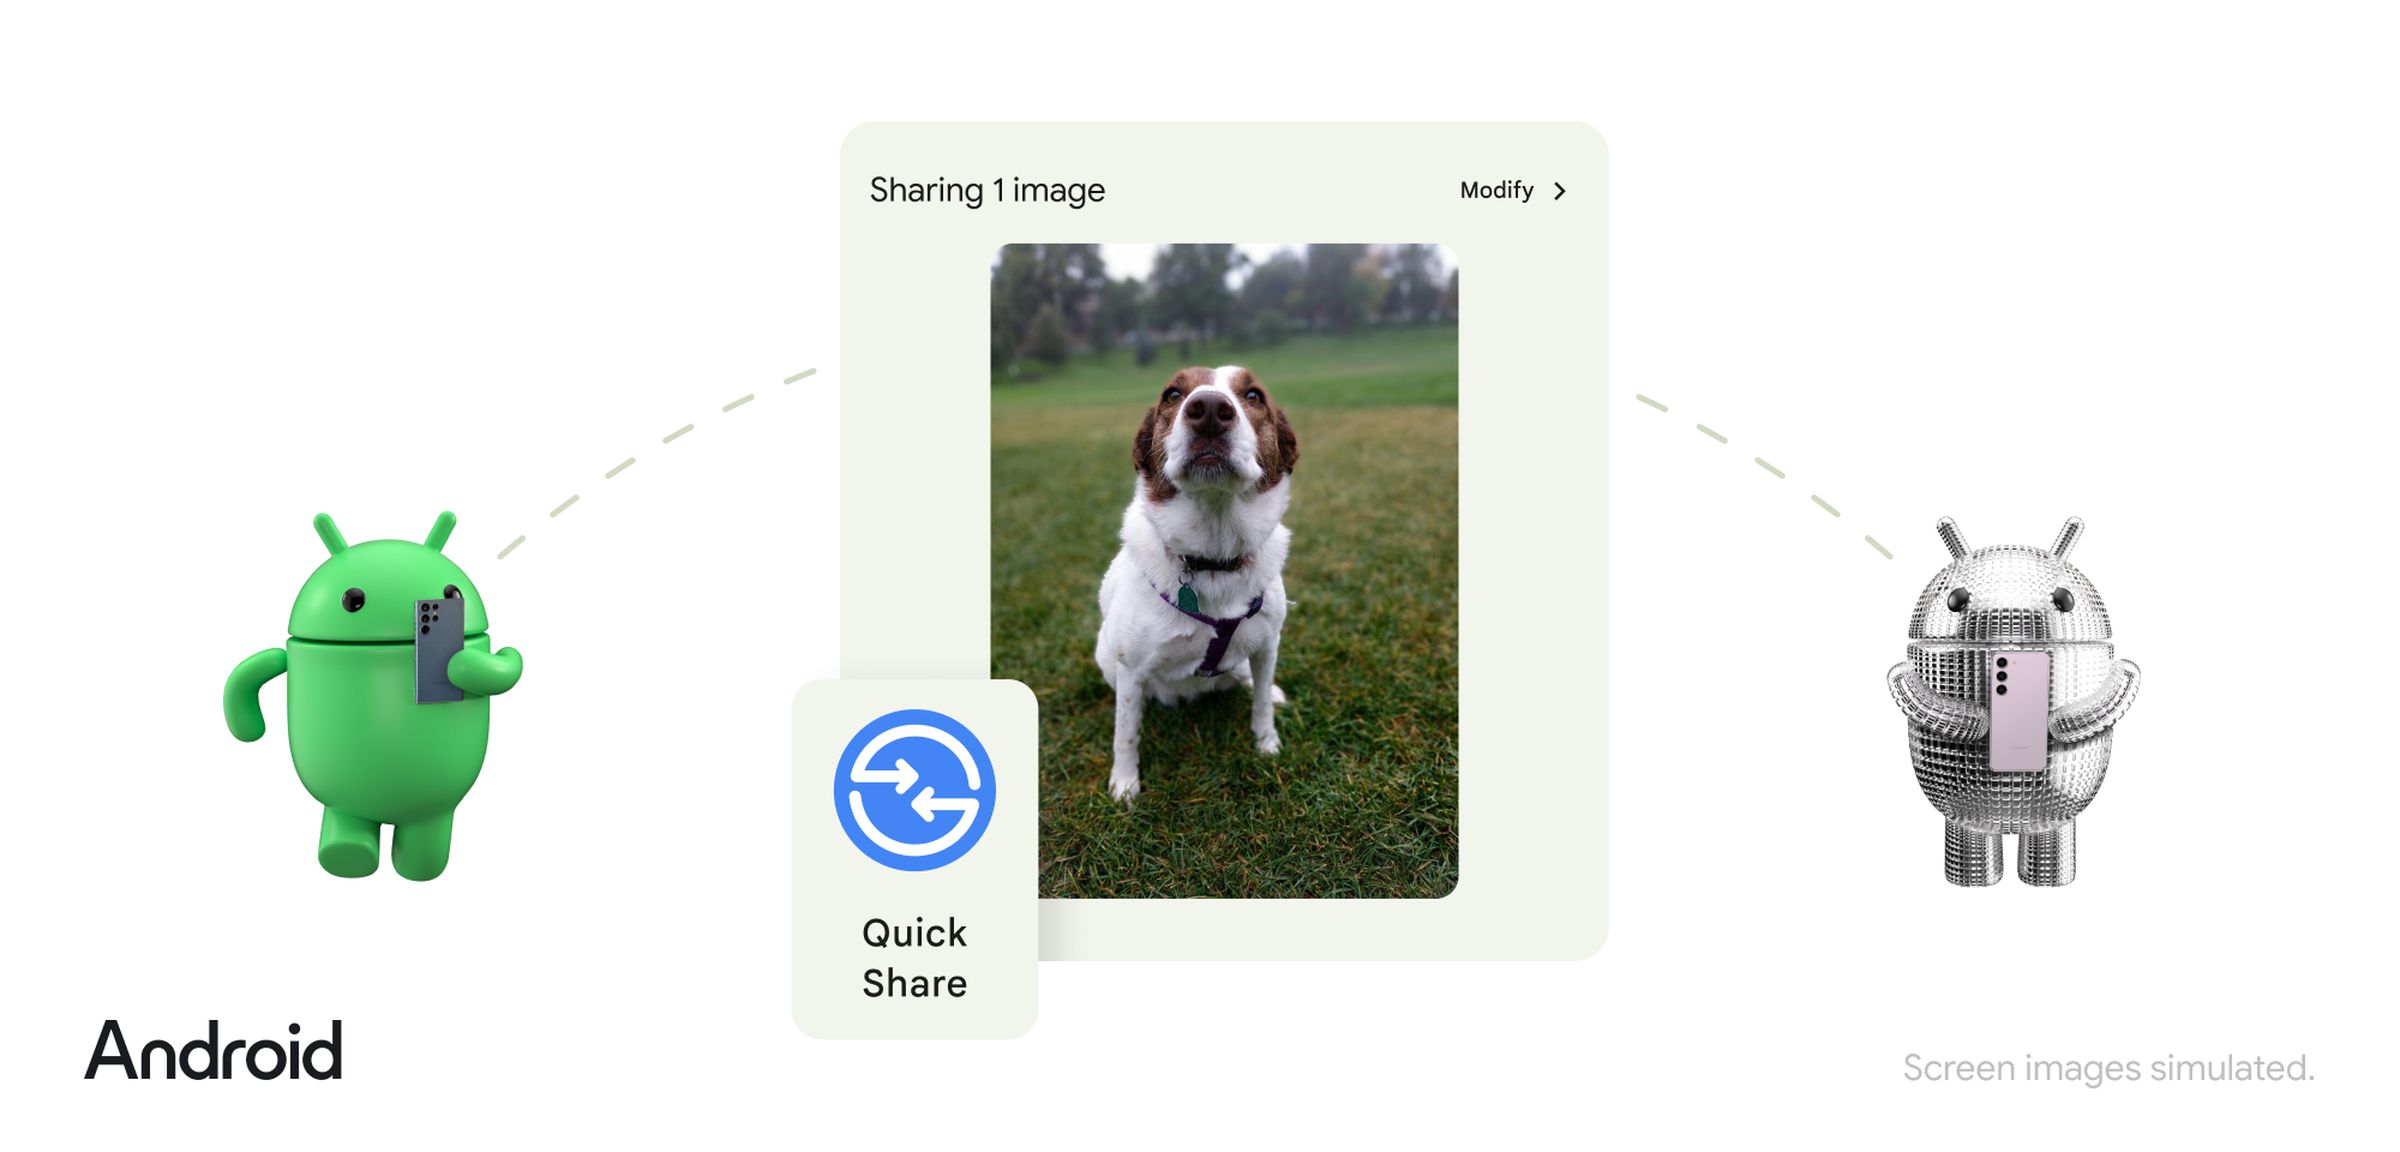 Graphic showing Android robots using Samsung phones sharing a photo of a dog.